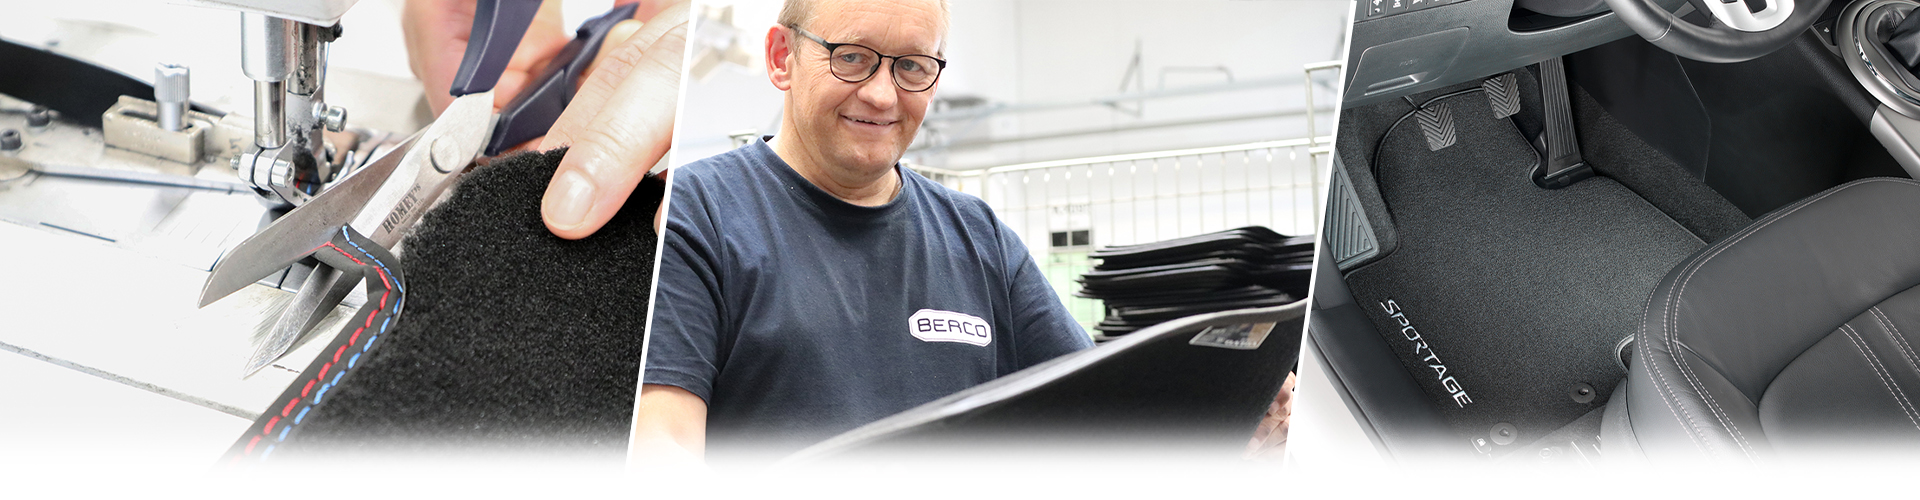 Berco - Car Carpets Banner Manufacturing Automotive Fabric Products